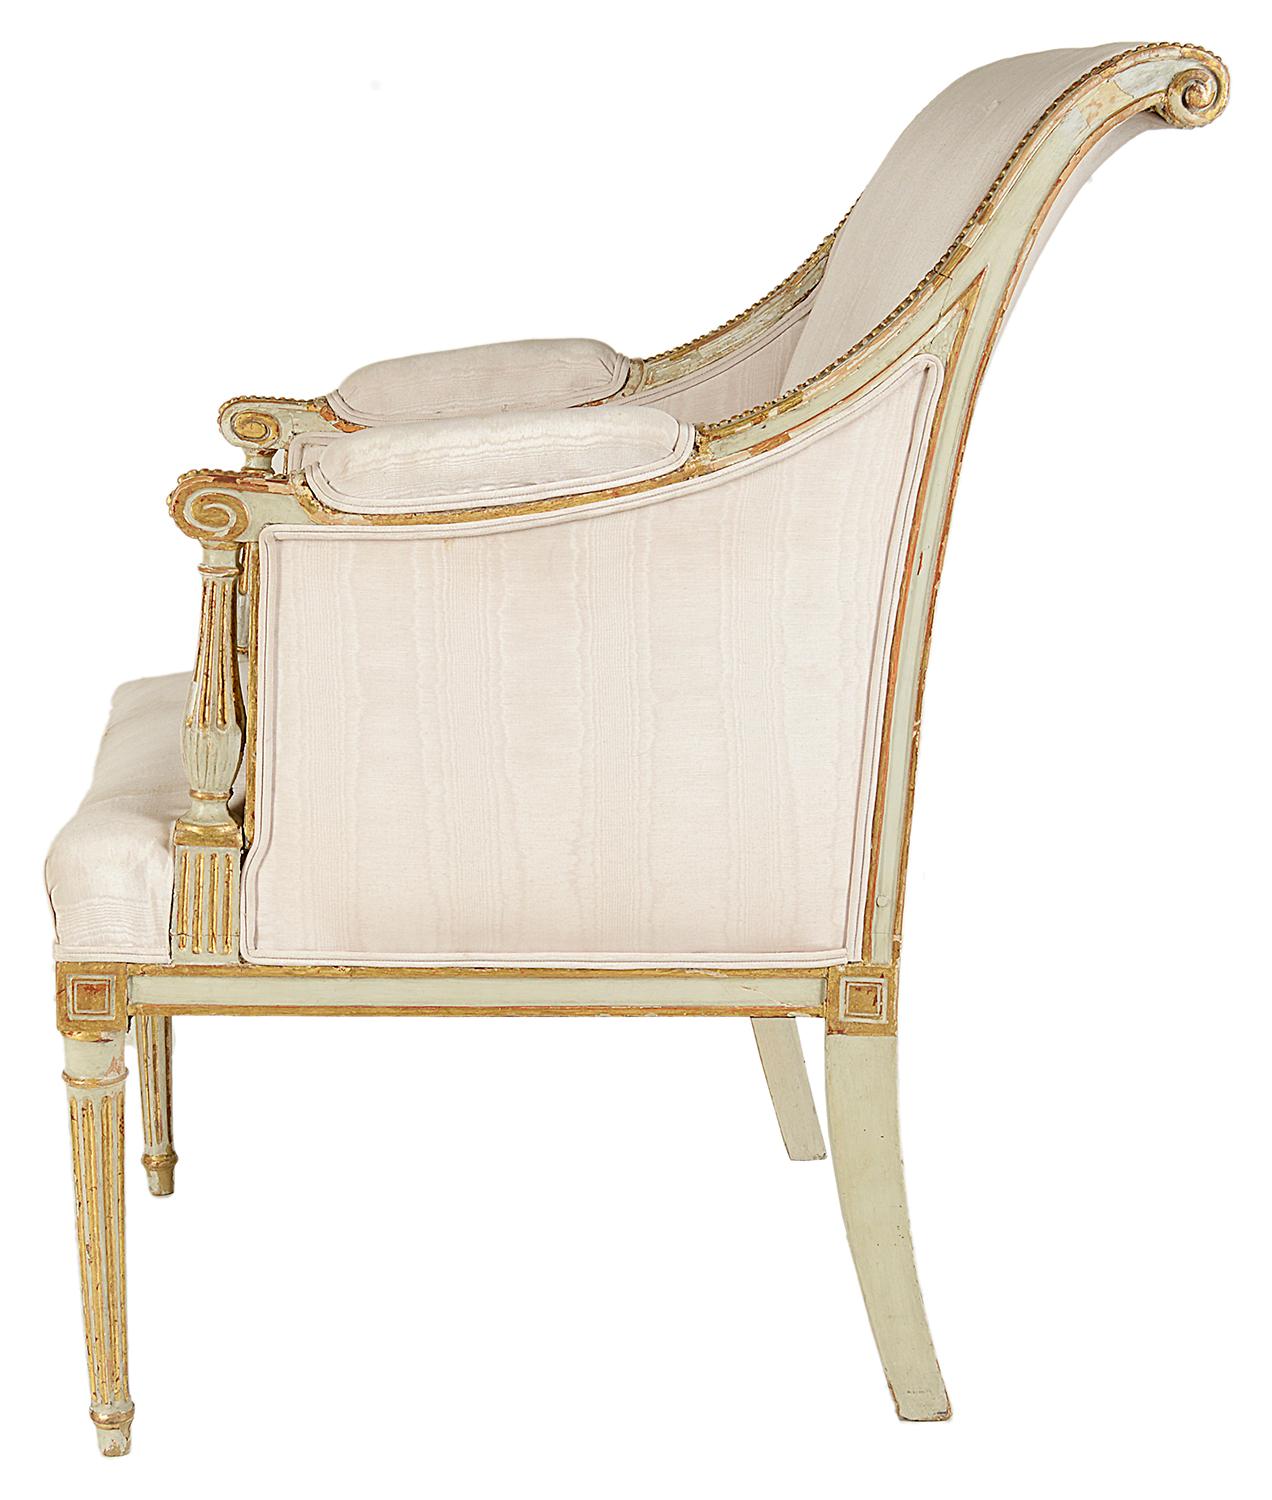 Painted 19th Century French Louis XVI Style Bergere Armchair For Sale